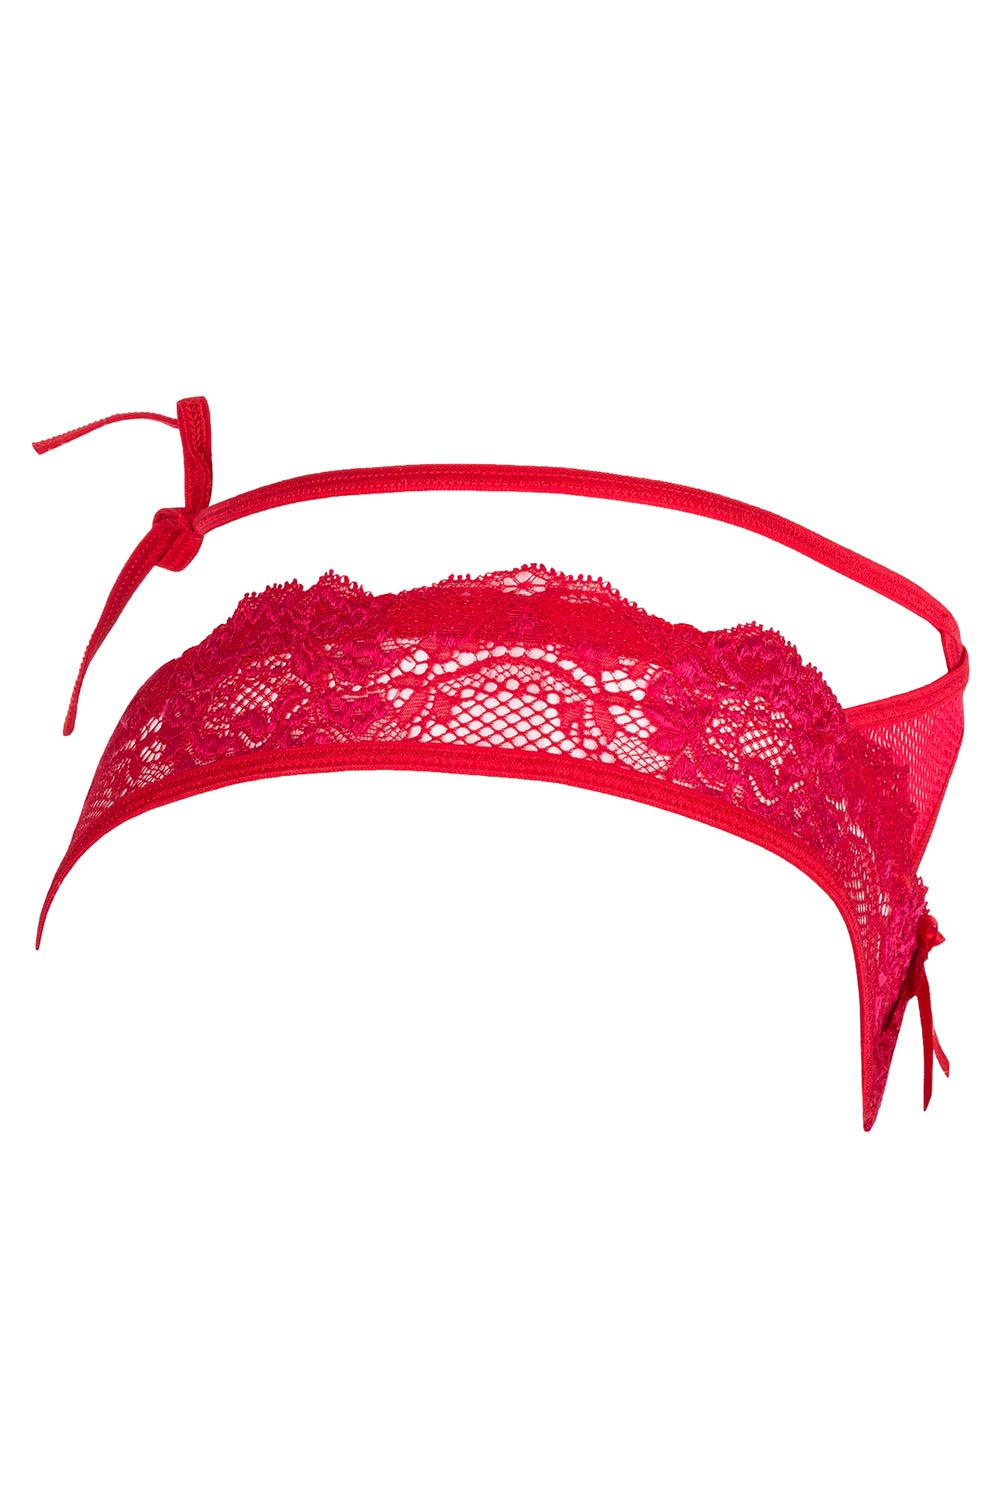 Axami V-6748 Rush women's thong with lace straps | Red